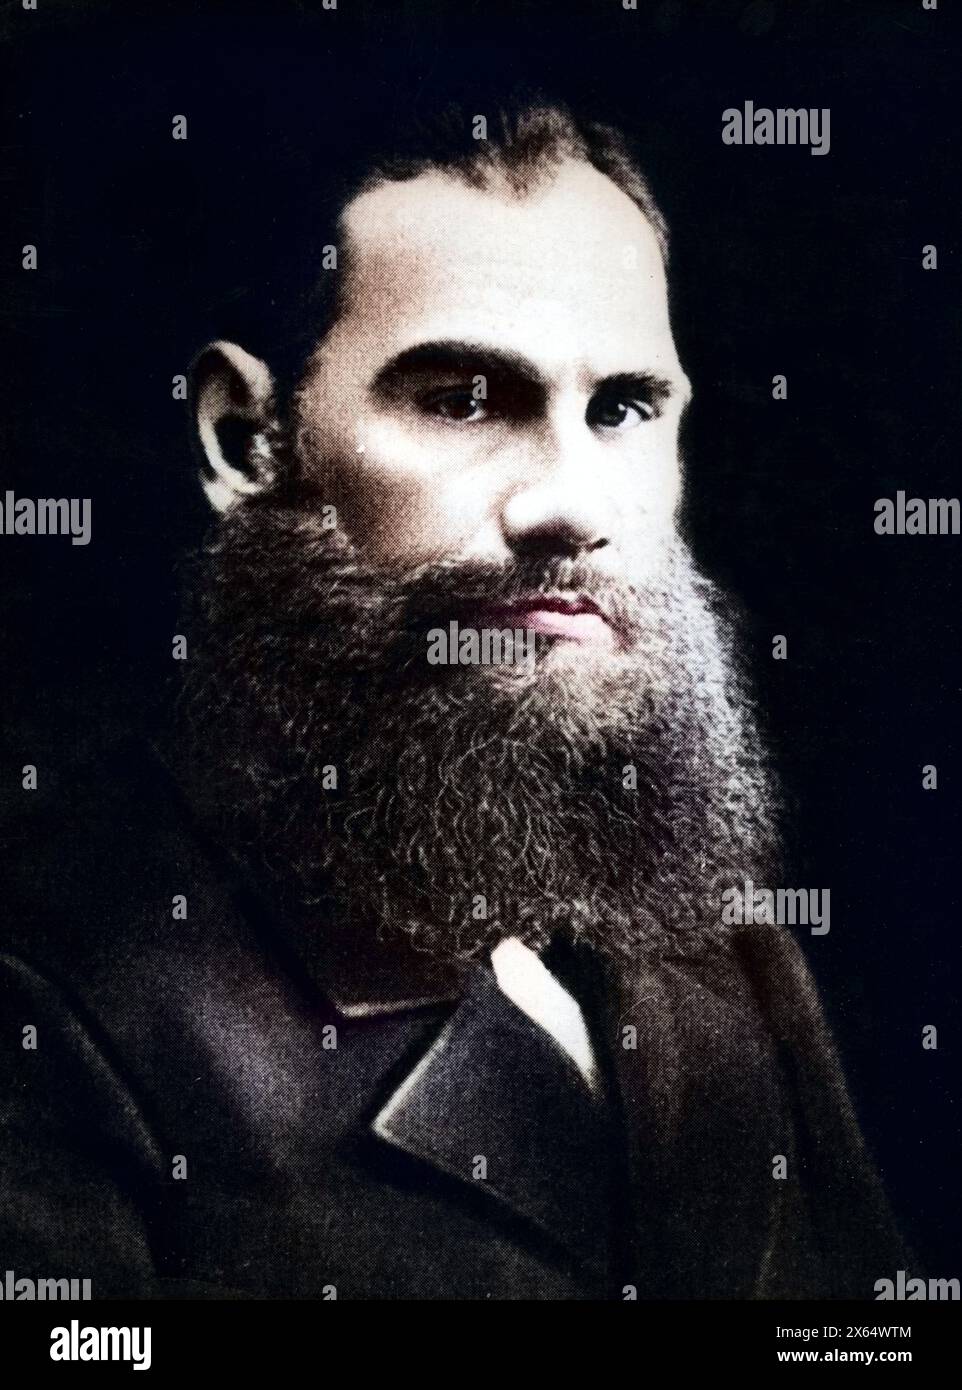 Tolstoy, Lev Nikolayevich, 9.9.1828 - 20.11.1910, Russian author / writer, portrait, ADDITIONAL-RIGHTS-CLEARANCE-INFO-NOT-AVAILABLE Stock Photo